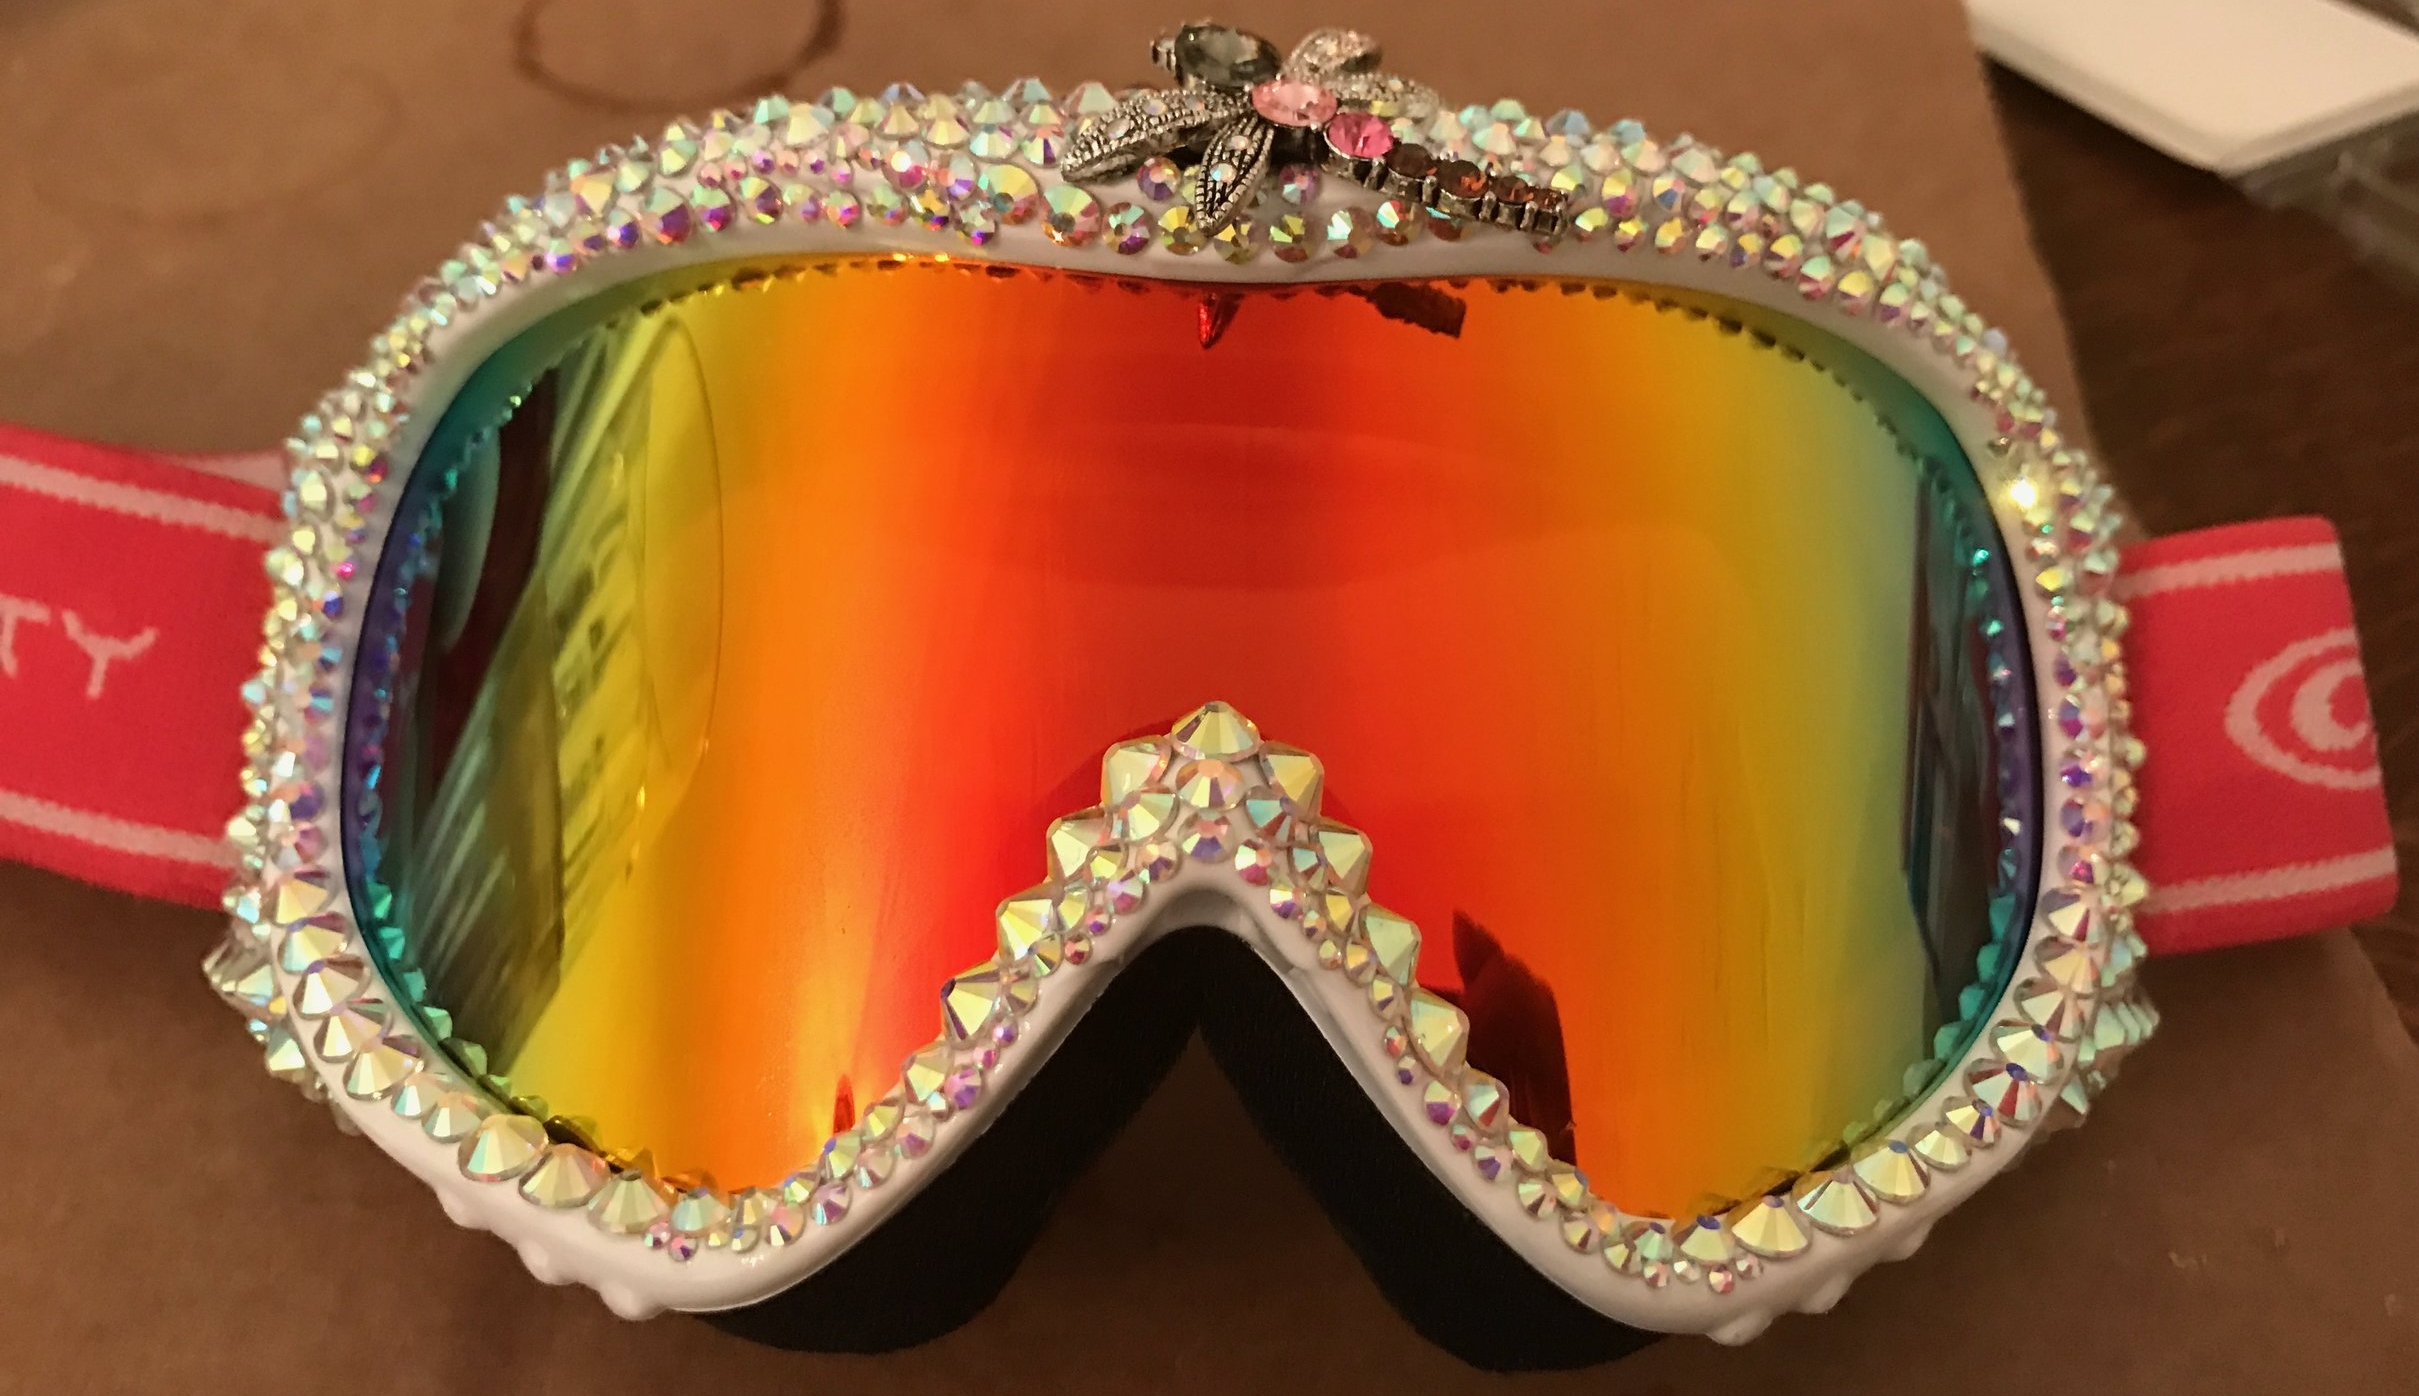 Dusty DIY: How to Customize Your Goggles for The Burn — Dusty Depot